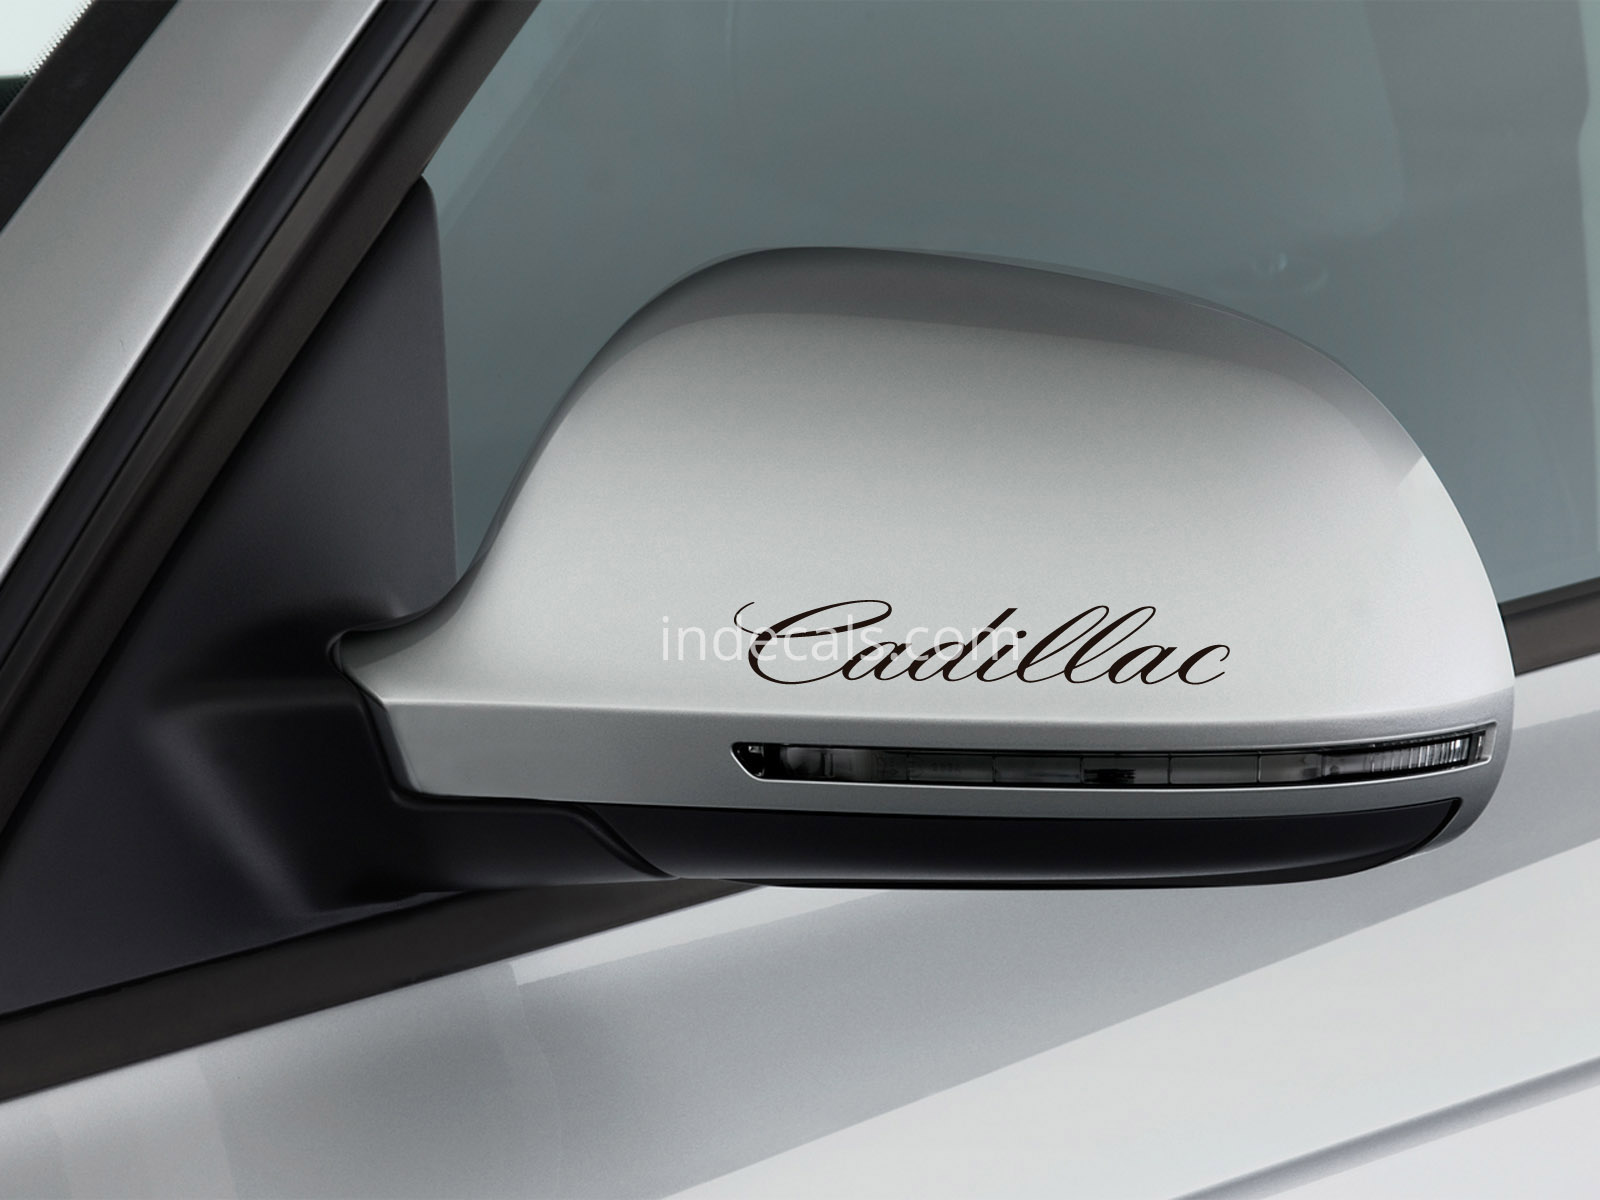 3 x Cadillac Stickers for Mirrors - Black